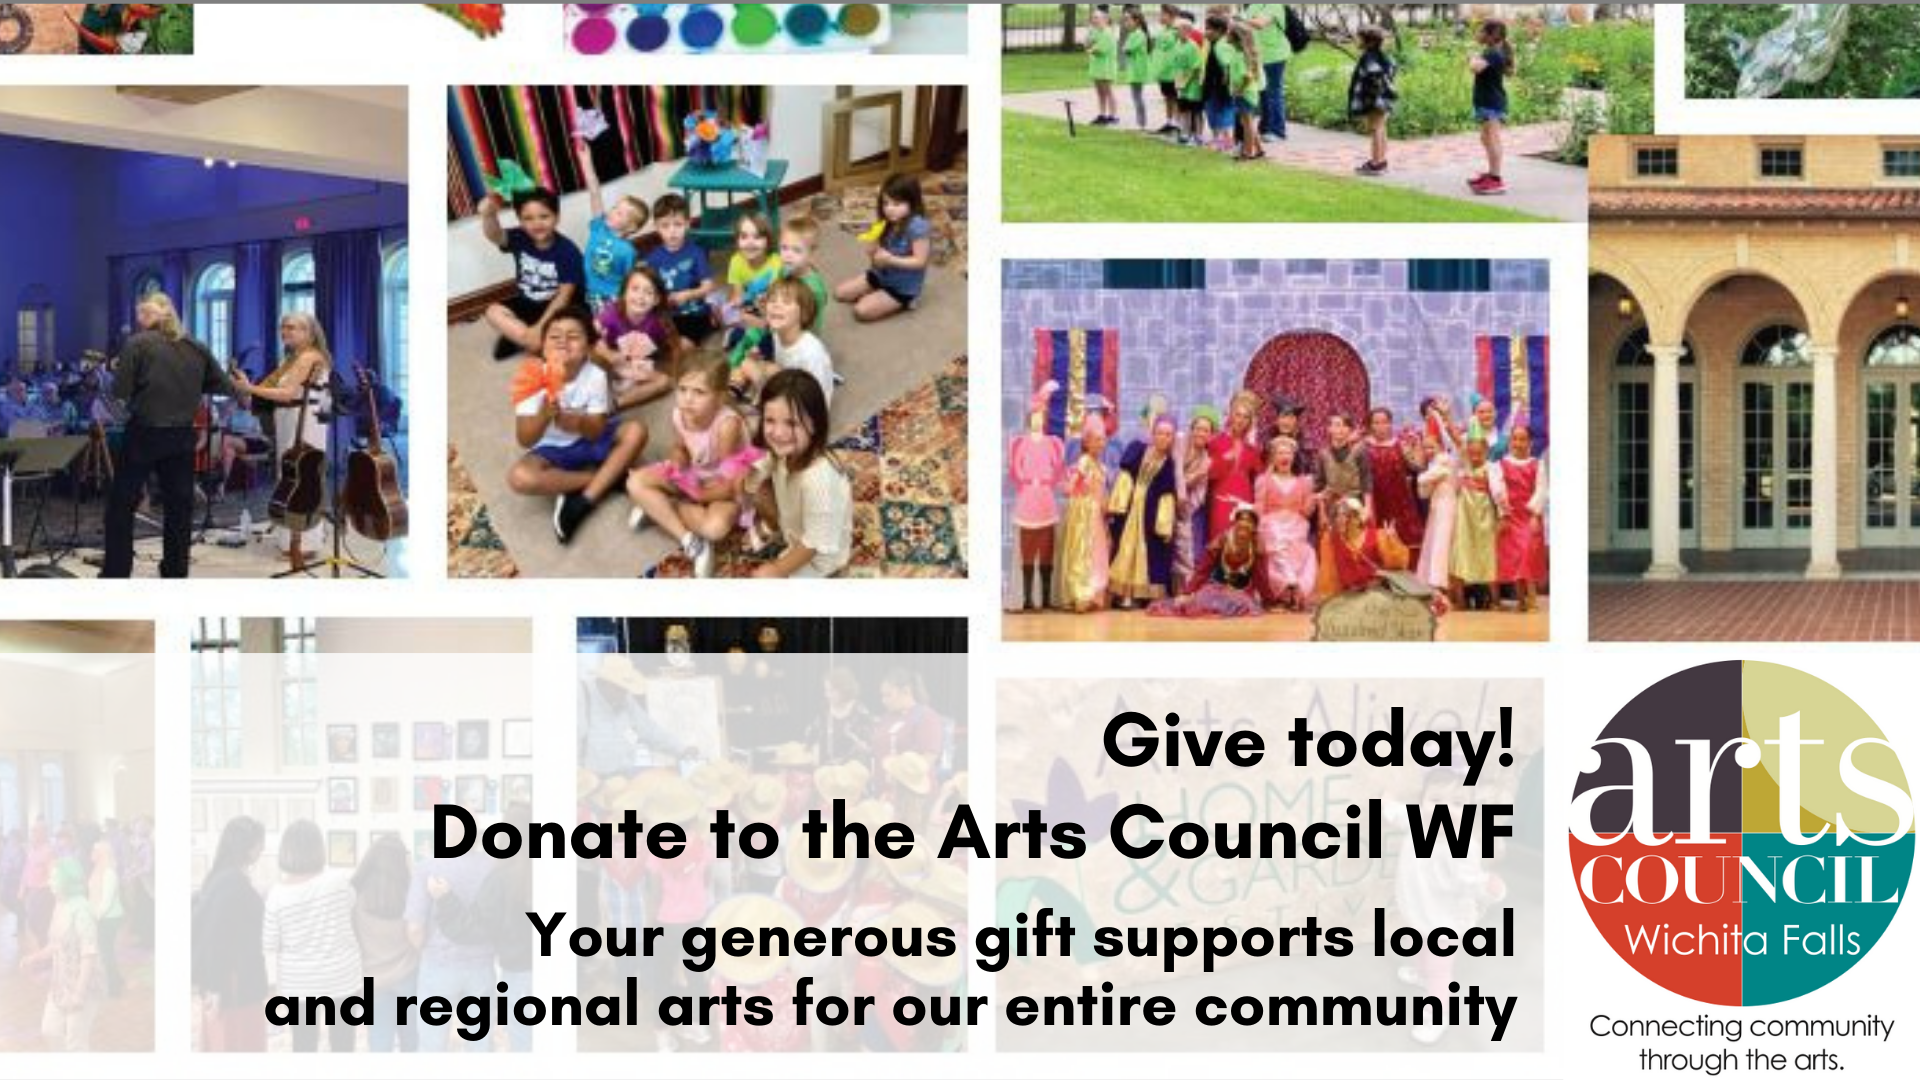 Summer programming offering creative opportunities - Wichita Falls Alliance  for Arts and Culture